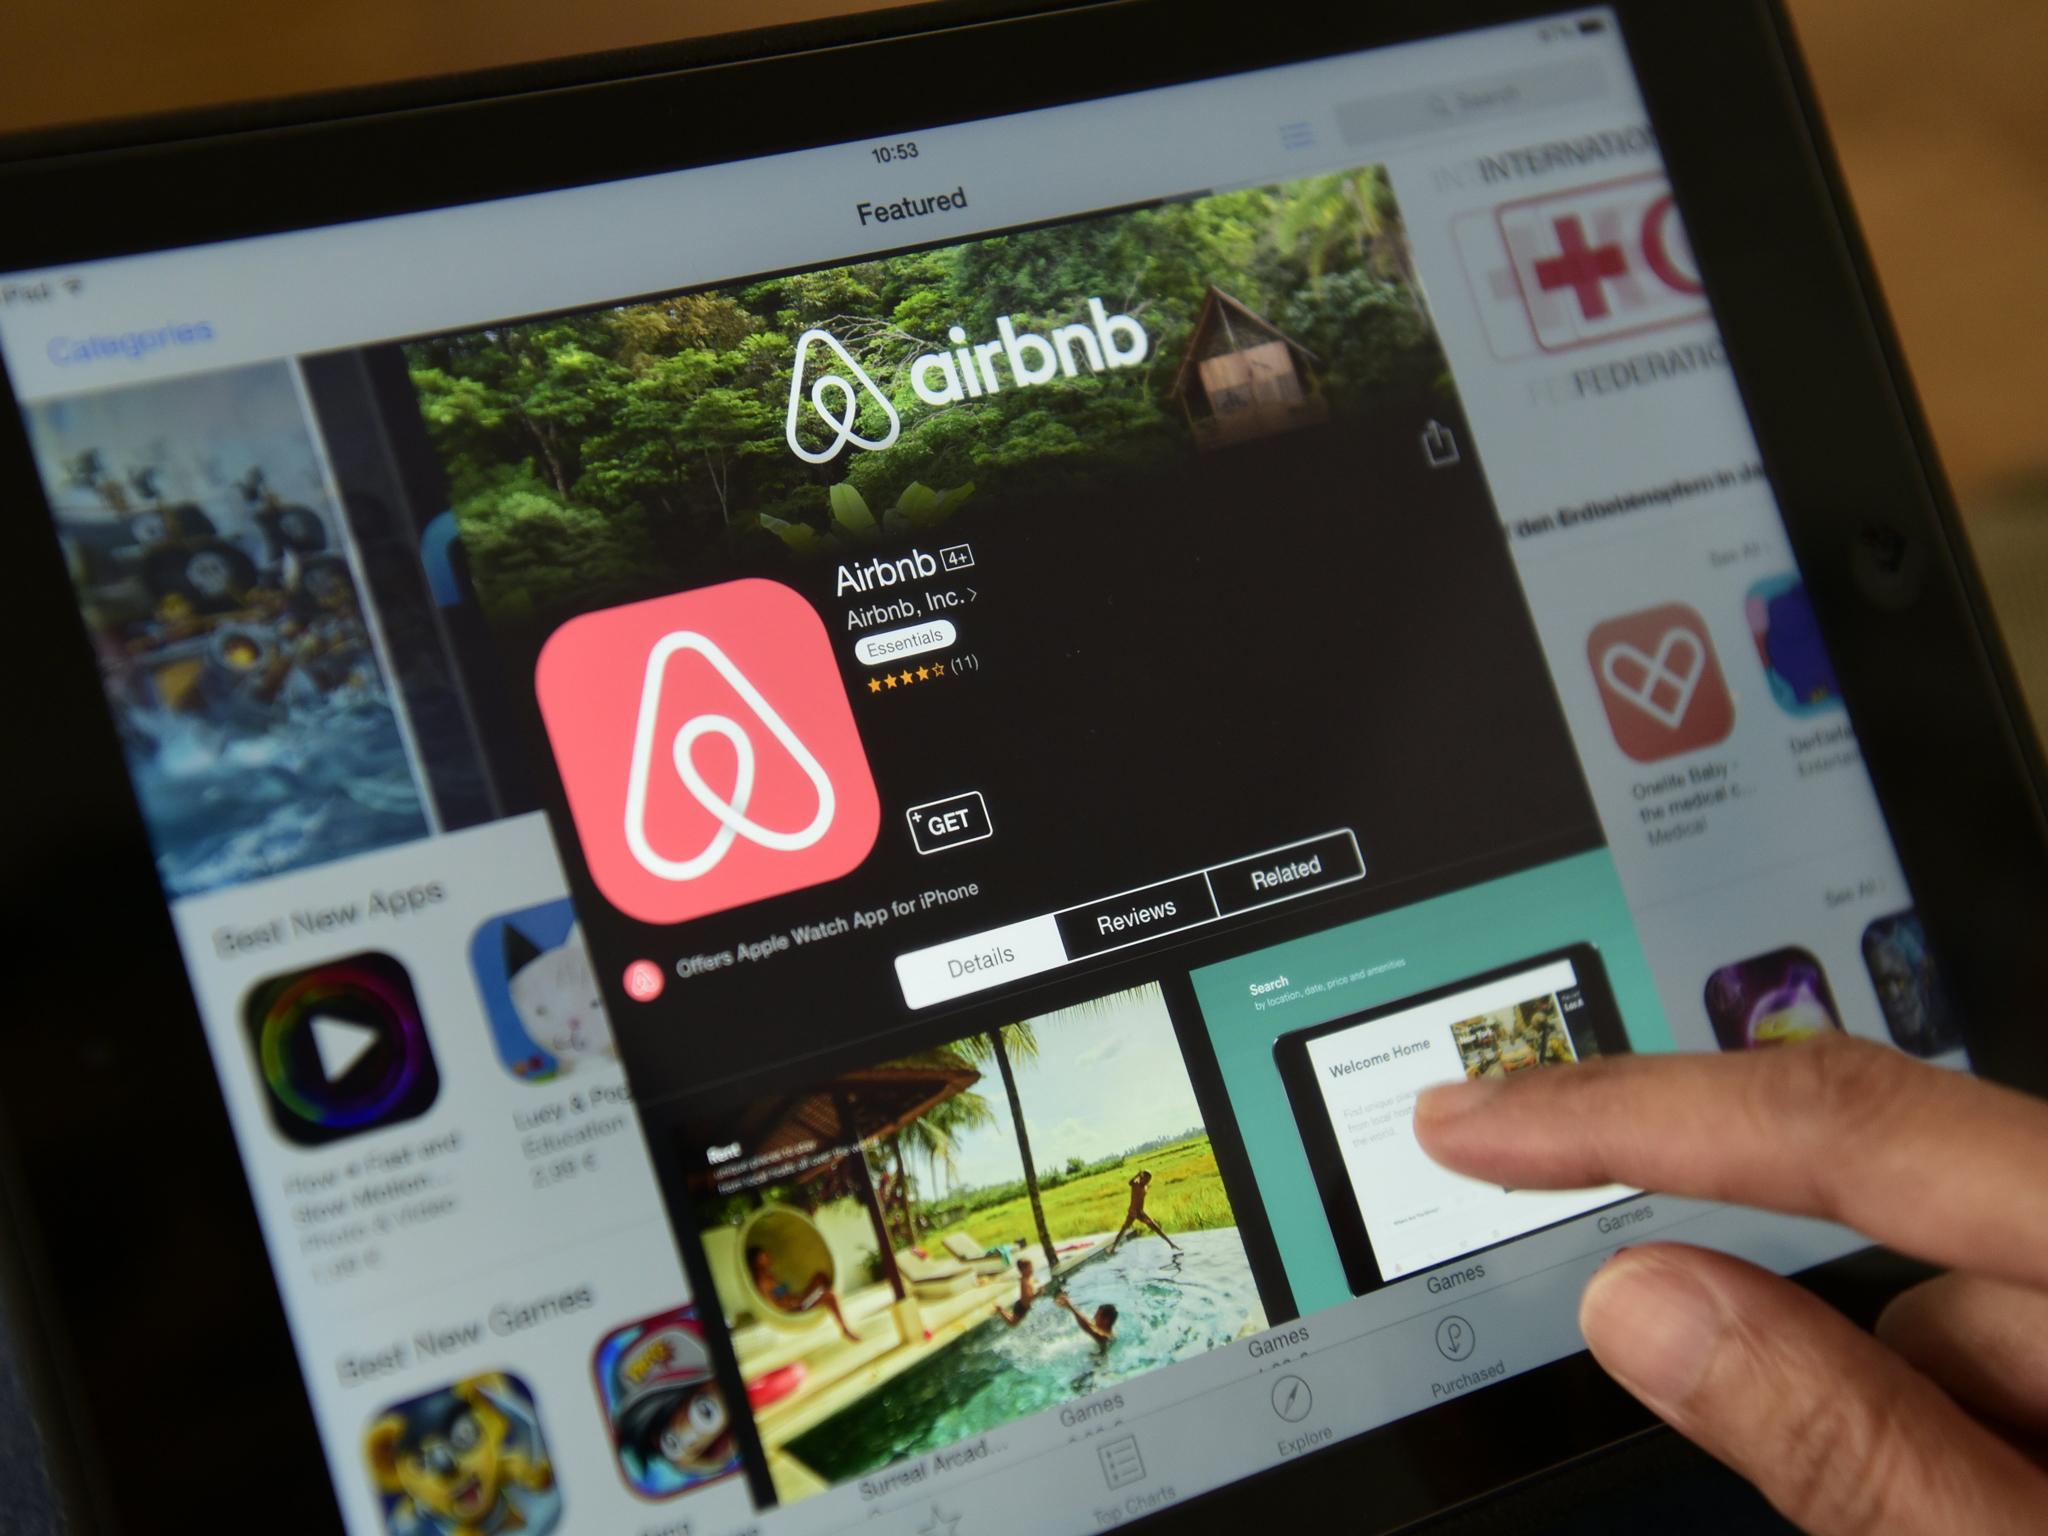 Airbnb is partnering with American Express GBT, BCD Travel and Carlson Wagonlit to snare business travellers